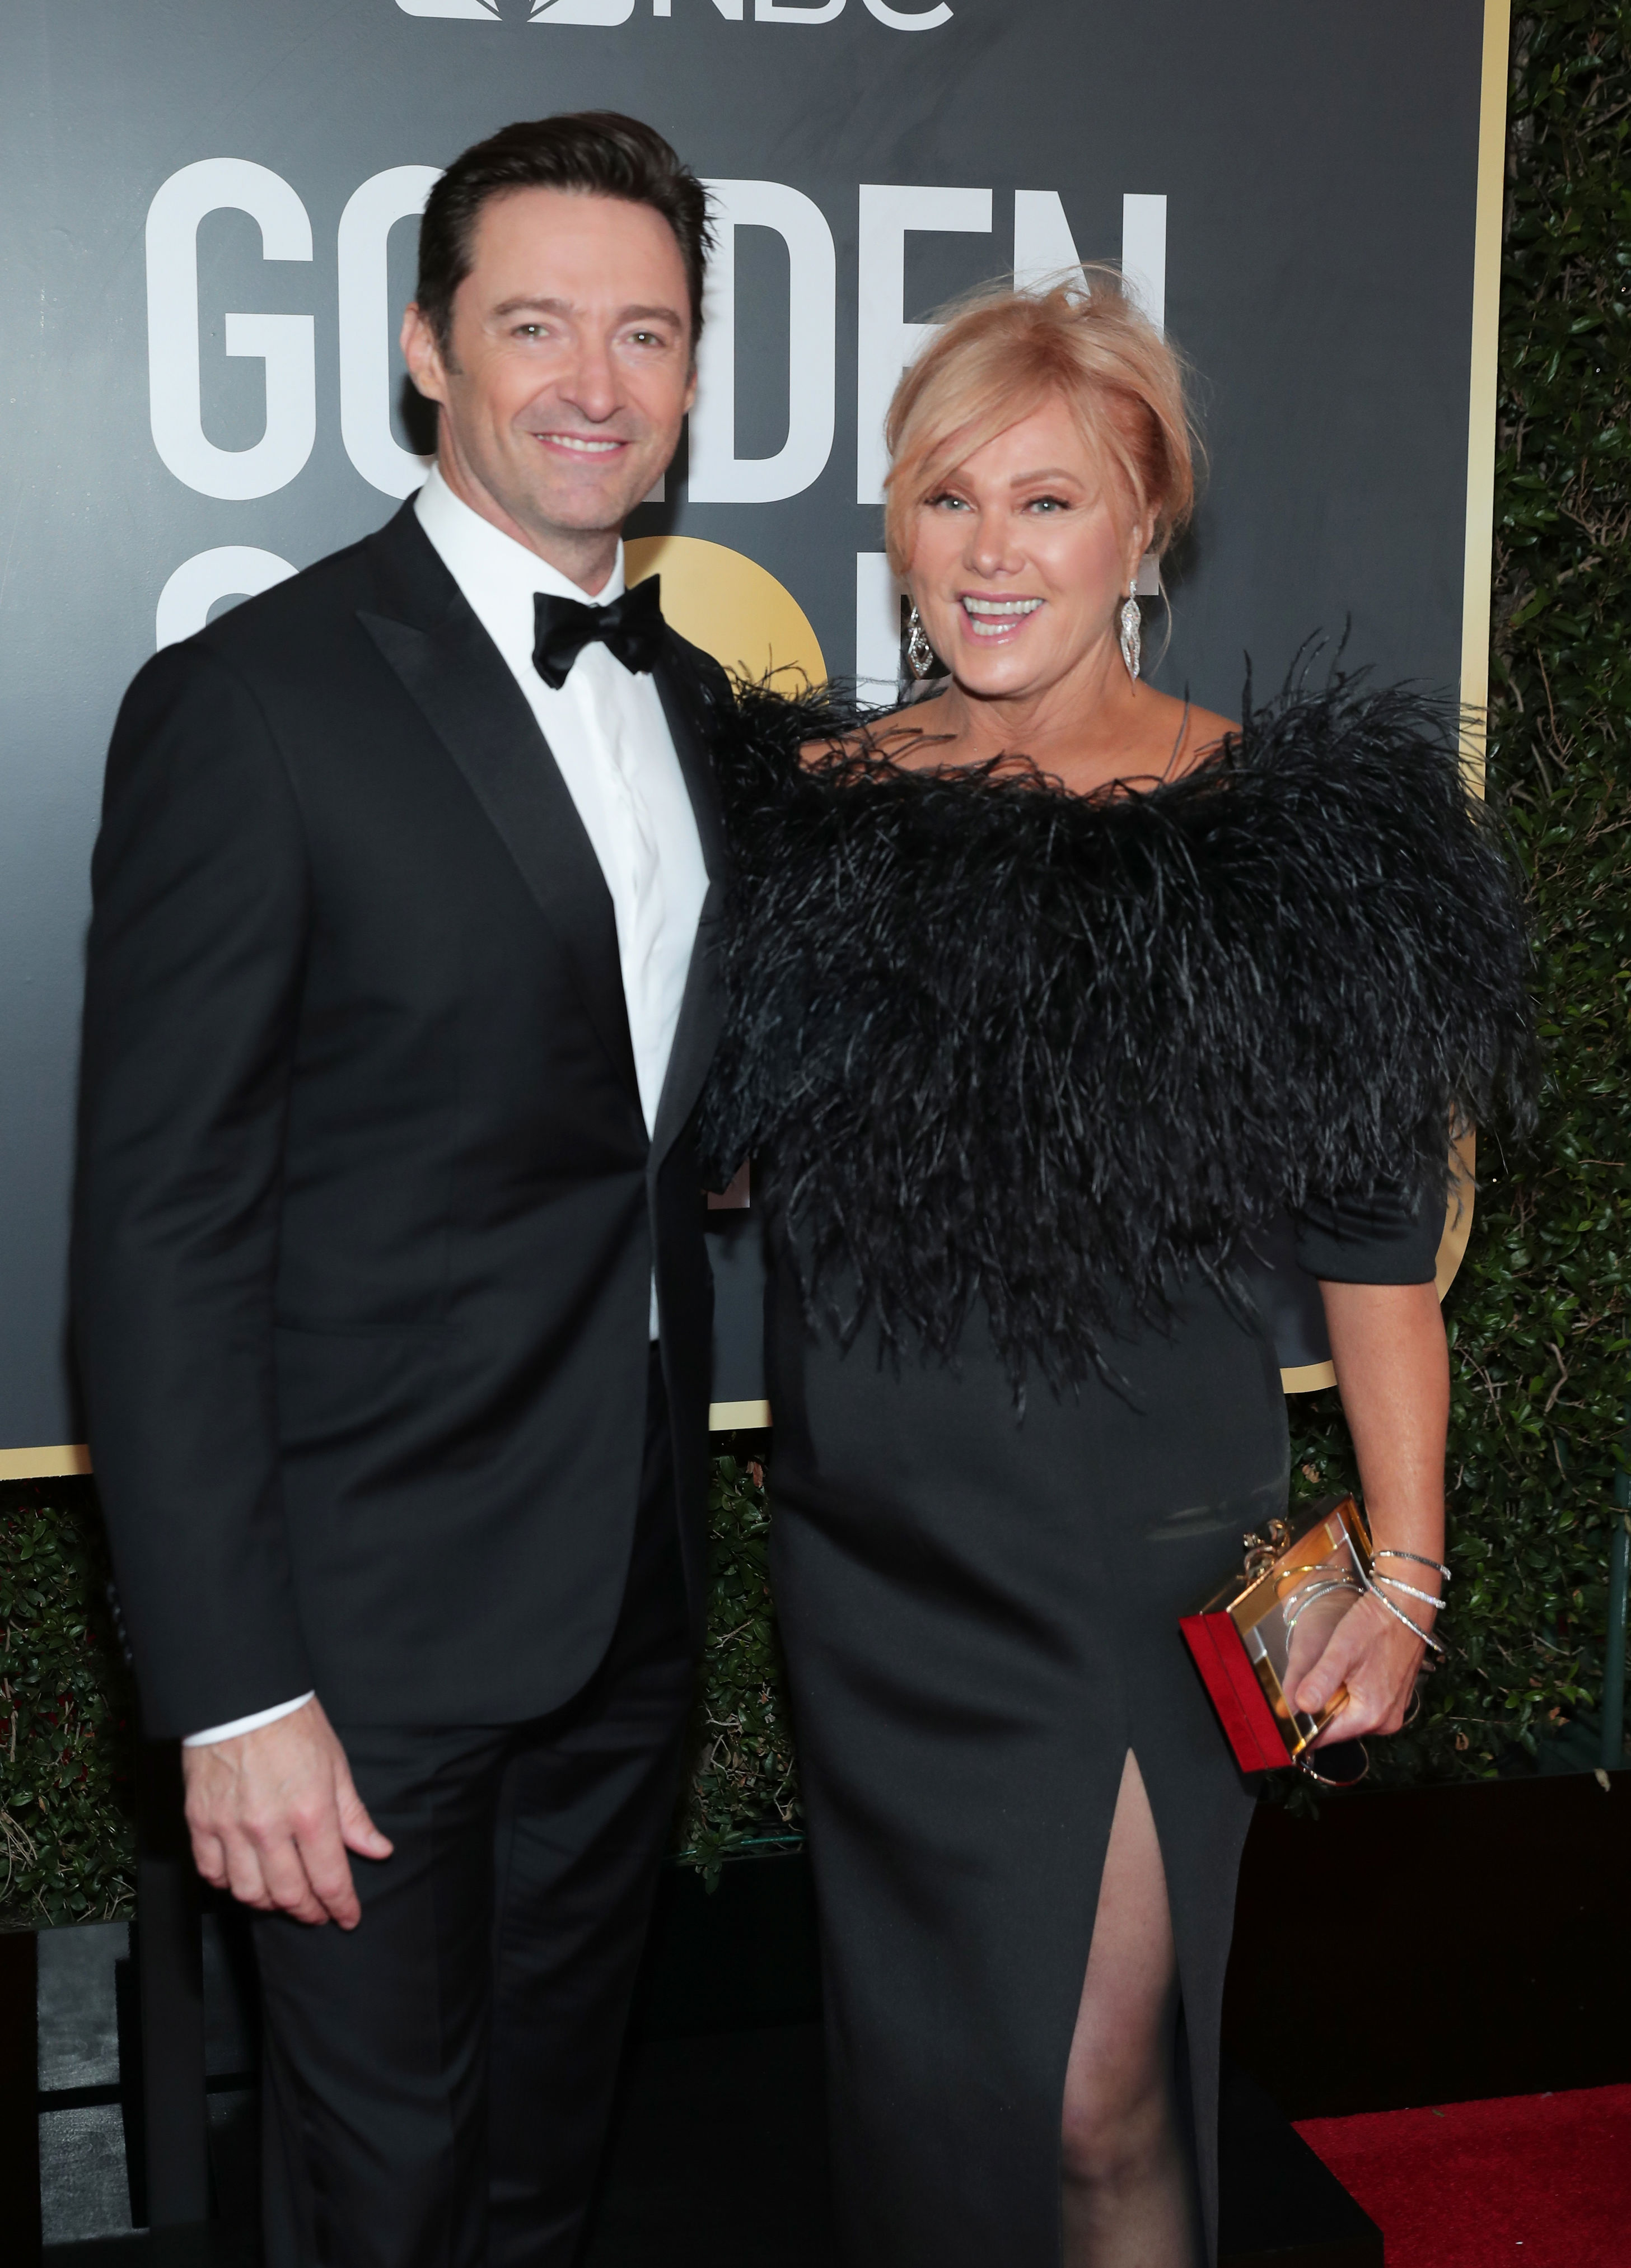 <p>Hugh Jackson met his wife of more than two decades, Deborra-lee Furness, when he landed a part -- his first after getting out of drama school -- on her Australian TV series "Correlli." "Deb, she was a big star. I get picked up, and Deb is in the front seat of the car. I'll never forget. She took off her seatbelt and she turned around and put out her hand and took off her sunglasses and said, 'Hi, I'm Deborra-lee Furness, nice to meet you.' I remember thinking, 'I like this girl,'" Hugh told People TV's "The Jess Cagle Interview" in 2017. They grew close over the next few weeks. "Deb and I were already best friends and I realized, I've got a crush on my leading lady. This is the thing you do not do. It's unprofessional and embarrassing." So what did he do? Ignored her. "I didn't talk to Deb for a week. Then I was like, 'This is not a good plan.'" He switched gears and invited 20 friends over for a dinner party and asked Deb for a hand in the kitchen making crêpes suzette. "She said, 'I noticed you haven't talked to me in like a week, what's going on?' I said, 'I got a crush on you. I'll get over it, I'm sorry.' She goes, 'Oh? Because I've got a crush on you too.' I never in a million years thought she reciprocated." They married in 1996 and now have two kids.</p>